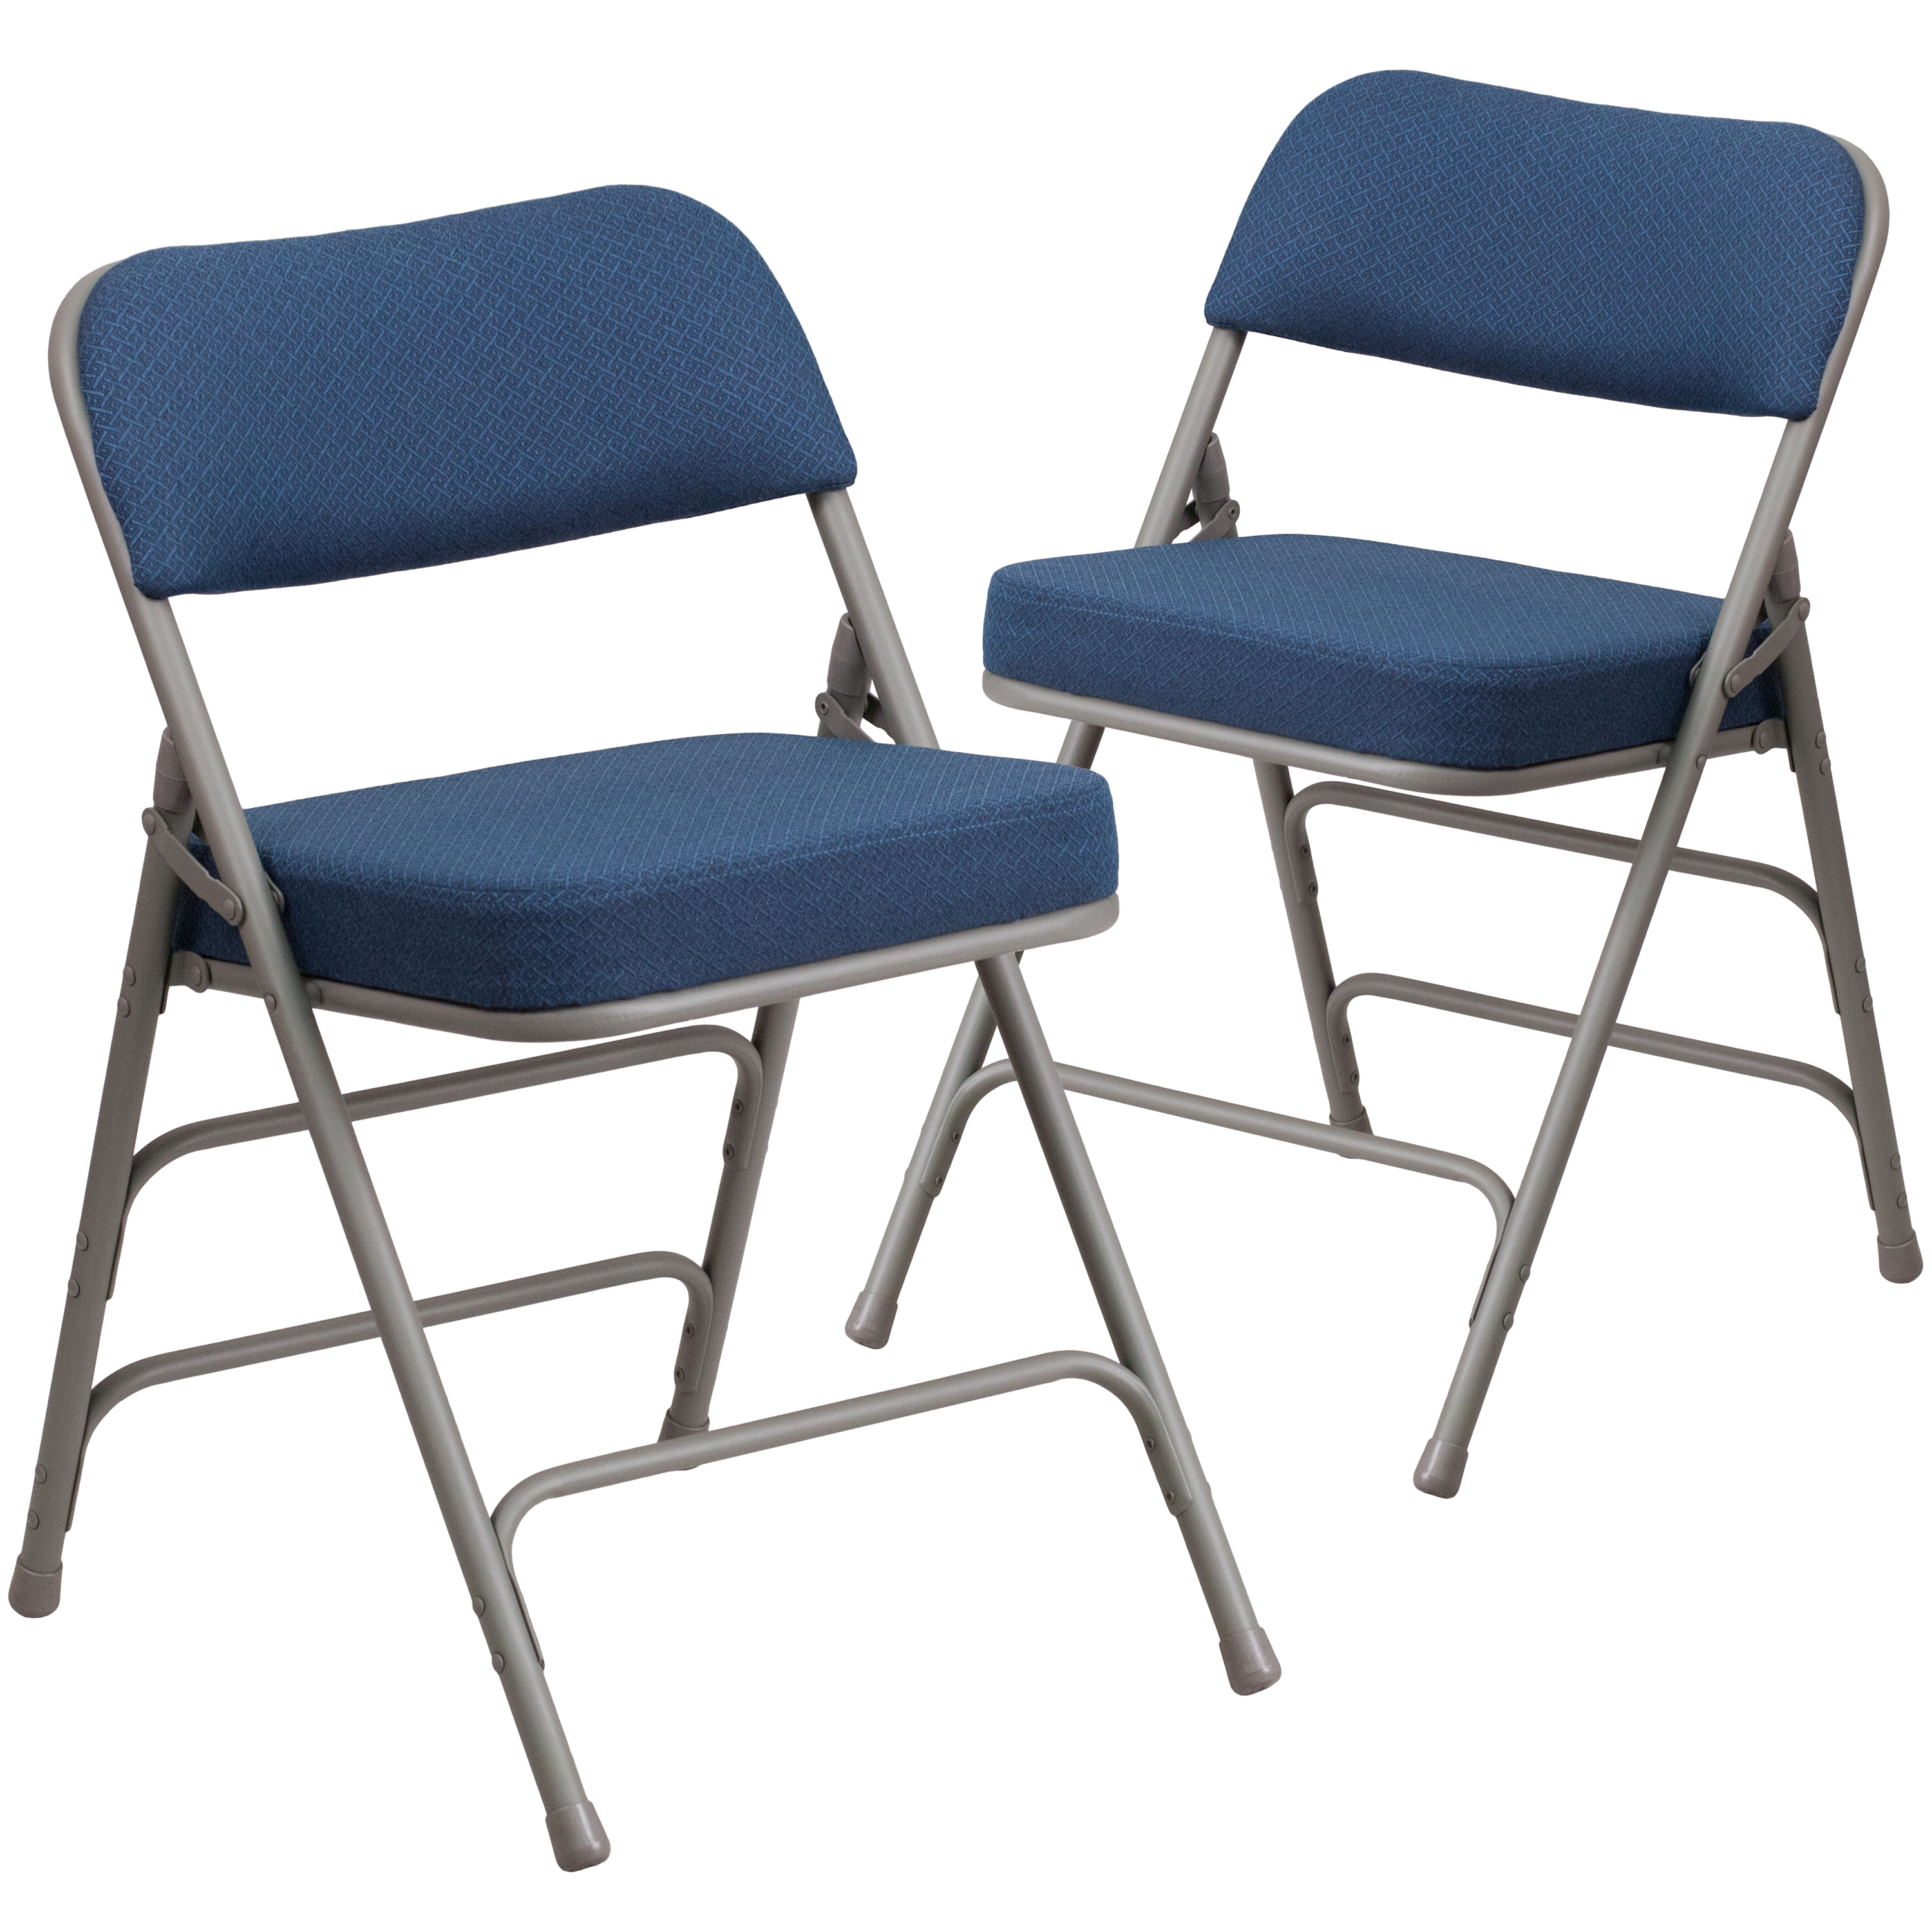 Flash Furniture 2-AW-MC320AF-NVY-GG Hercules Premium Curved Triple Braced & Double Hinged Navy Fabric Metal Folding Chair, 2 Pack 